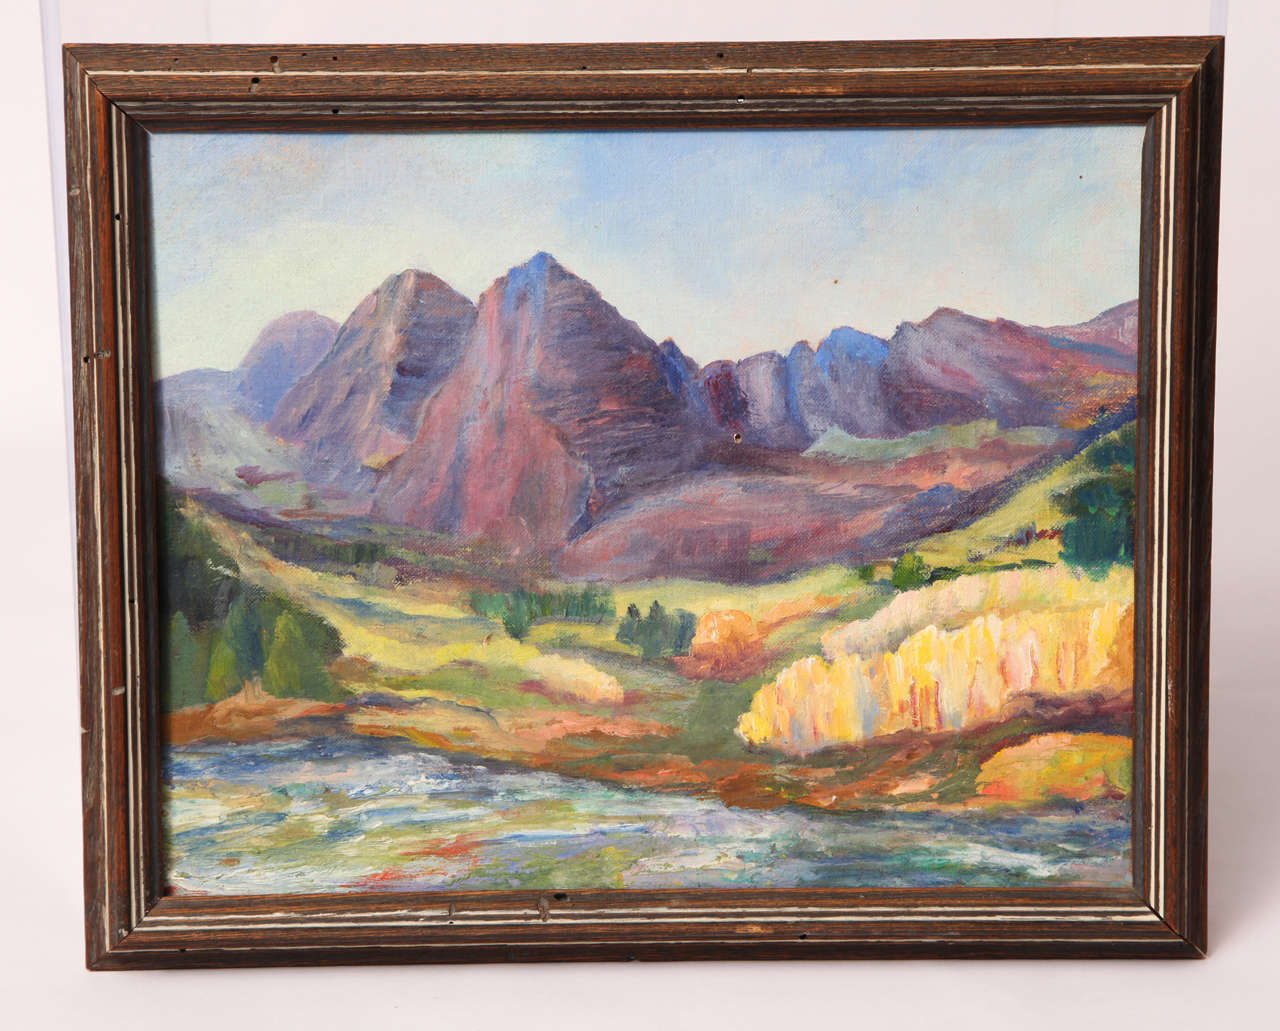 In true impressionist style, the lushness of the foreground is presented with short, thick brush strokes; contrasting the stark and jagged mountain range behind.